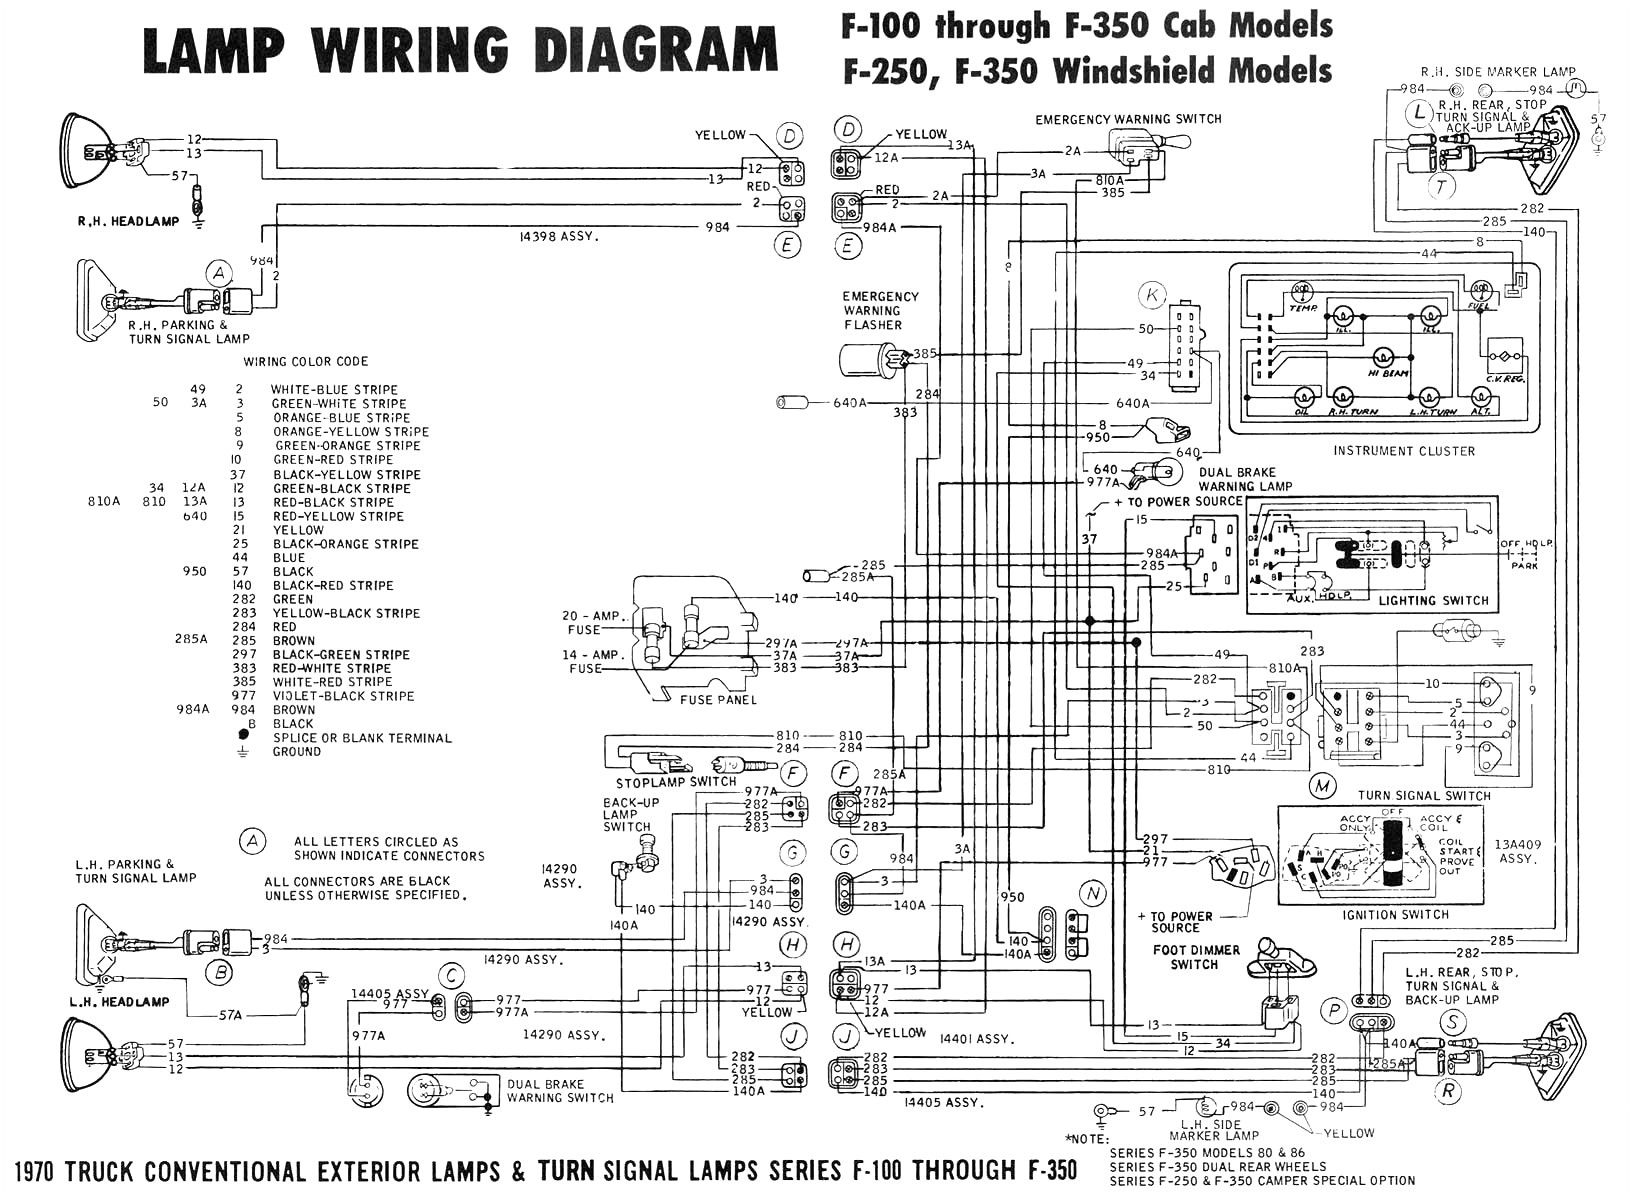 1991 ford f 350 wiring diagrams wiring diagram centre 06 ford f 250 wiring diagram wiring